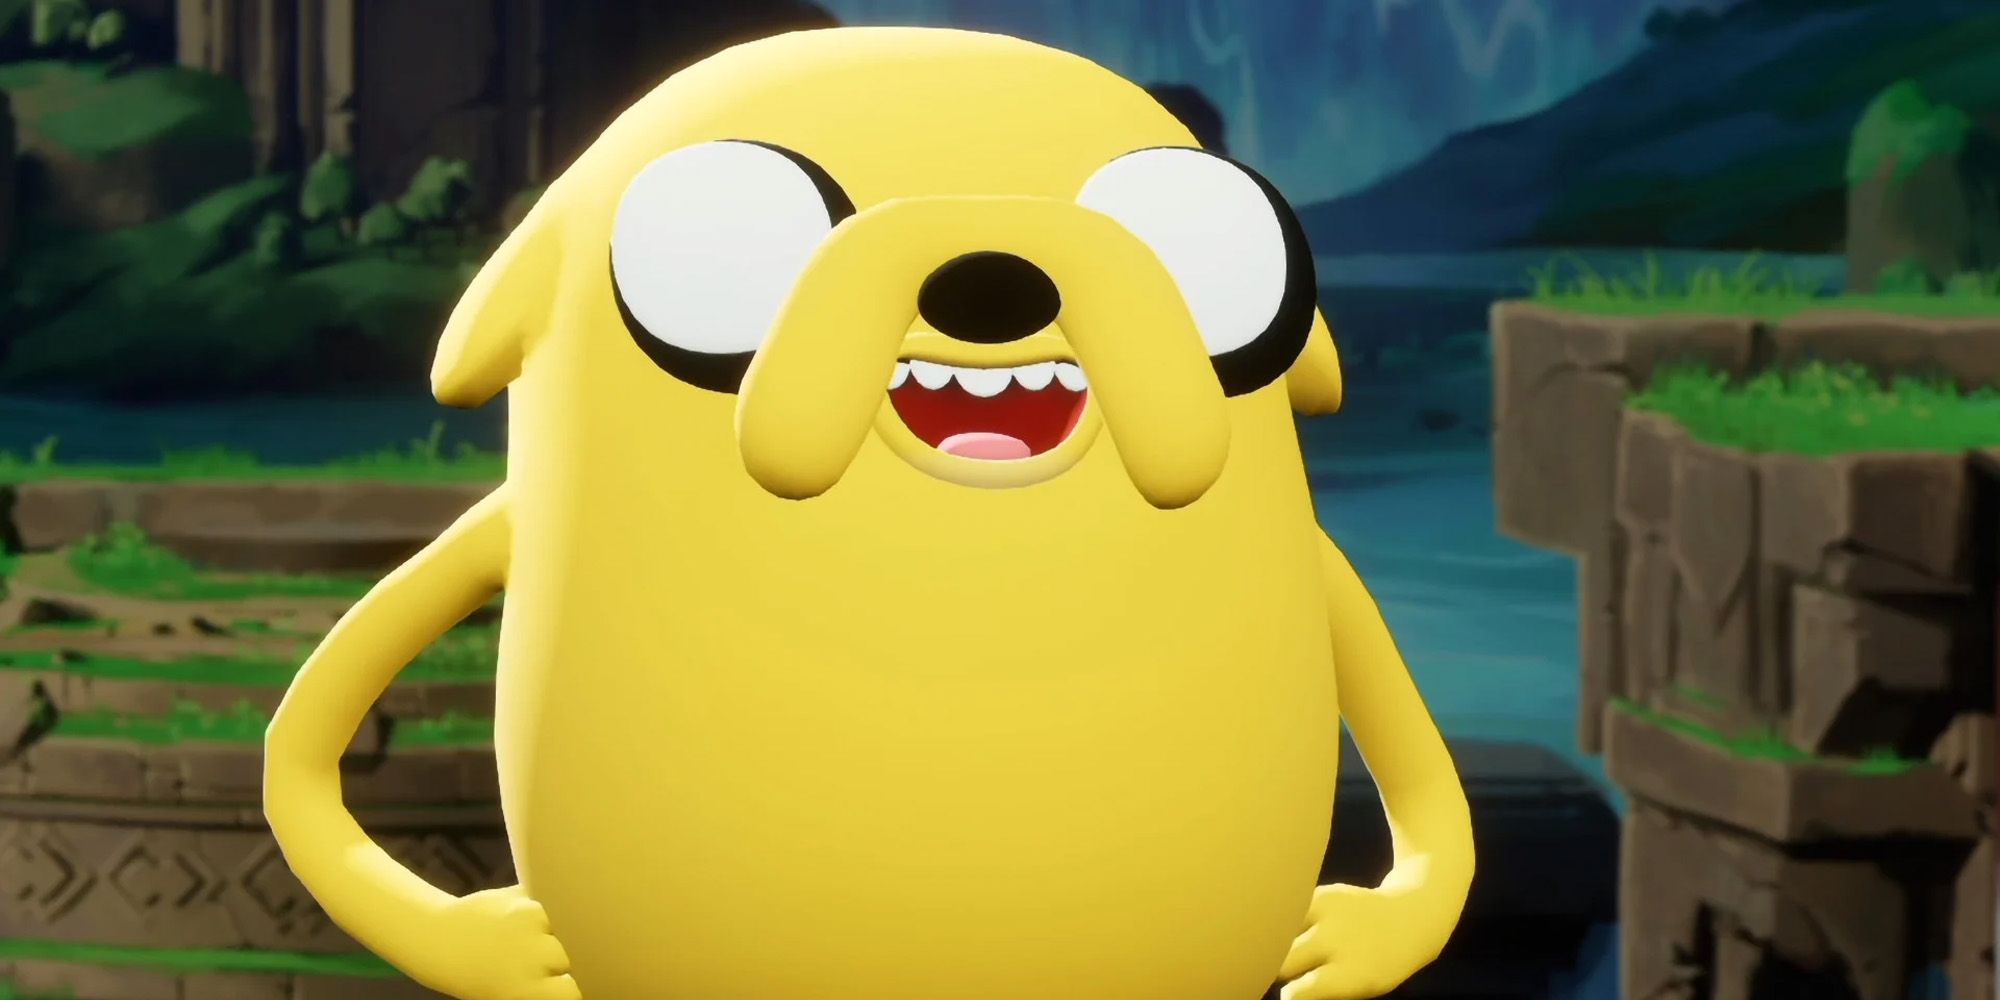 MultiVersus jake the dog character guide